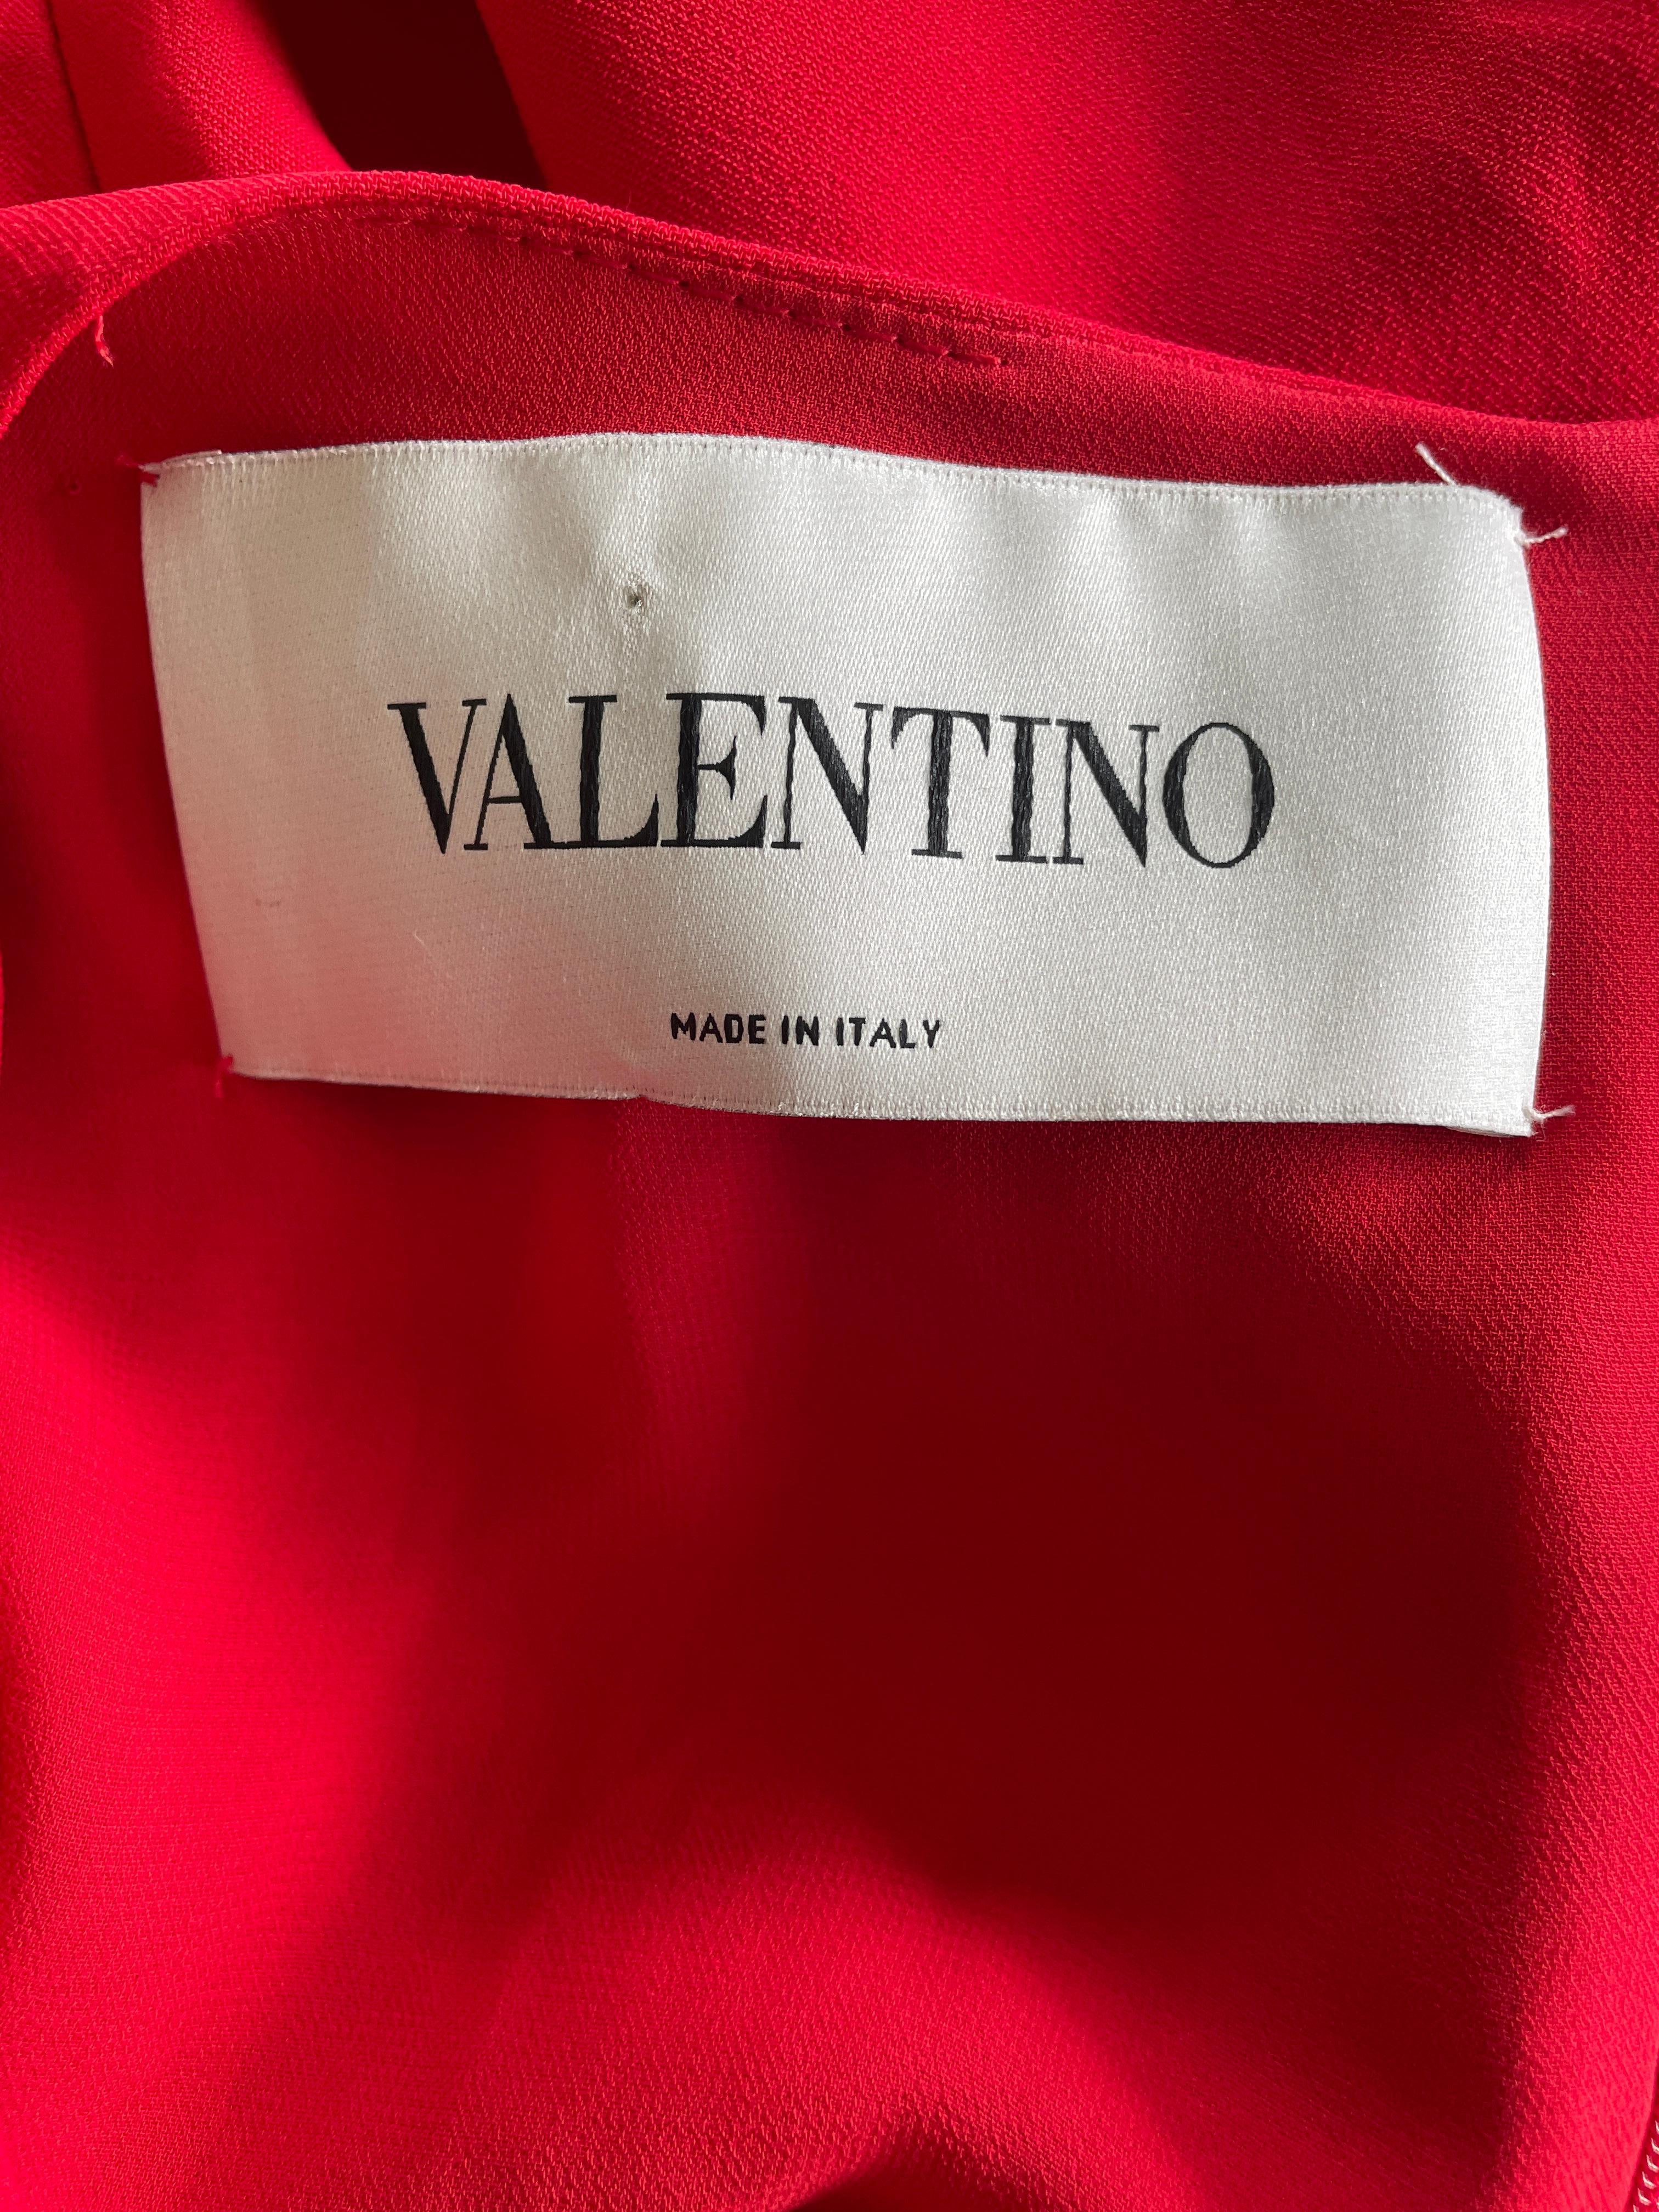 Valentino Vintage 1980's Plunging Red Crepe Evening Dress in Generous Size 12 For Sale 4